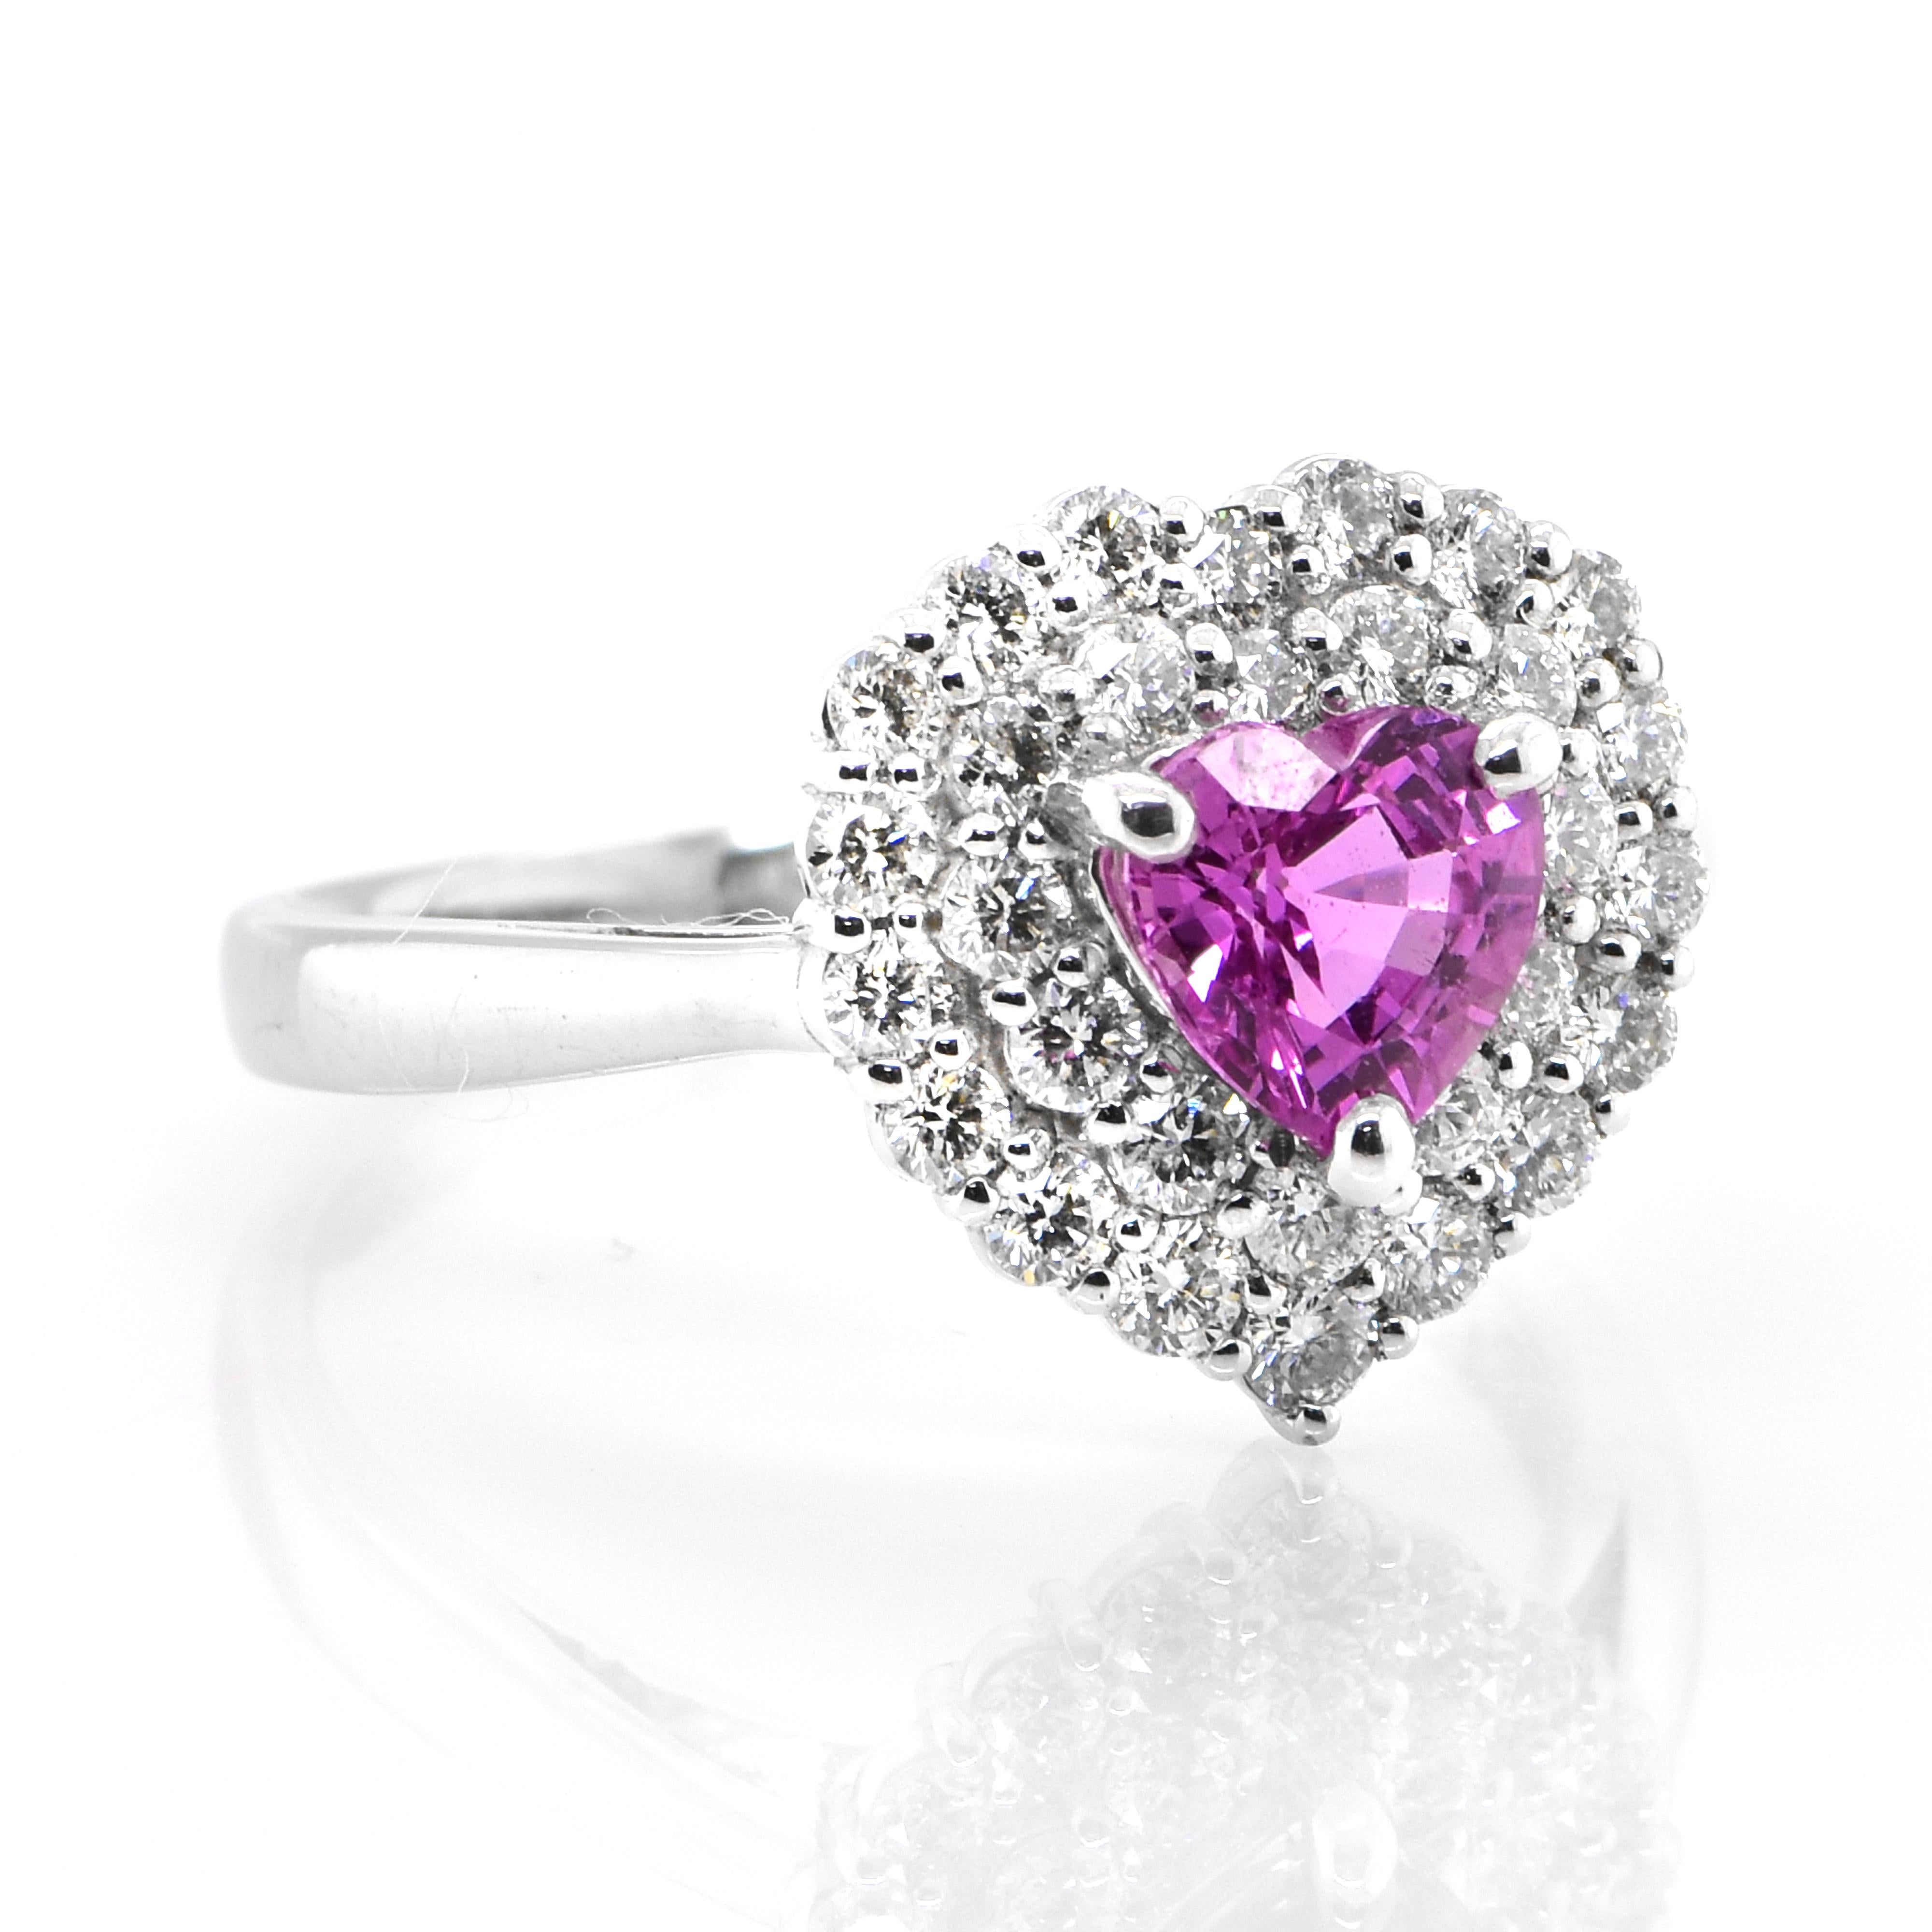 Modern 1.06 Carat Heart-Cut Pink Sapphire and Diamond Double-Halo Ring Set in Platinum For Sale